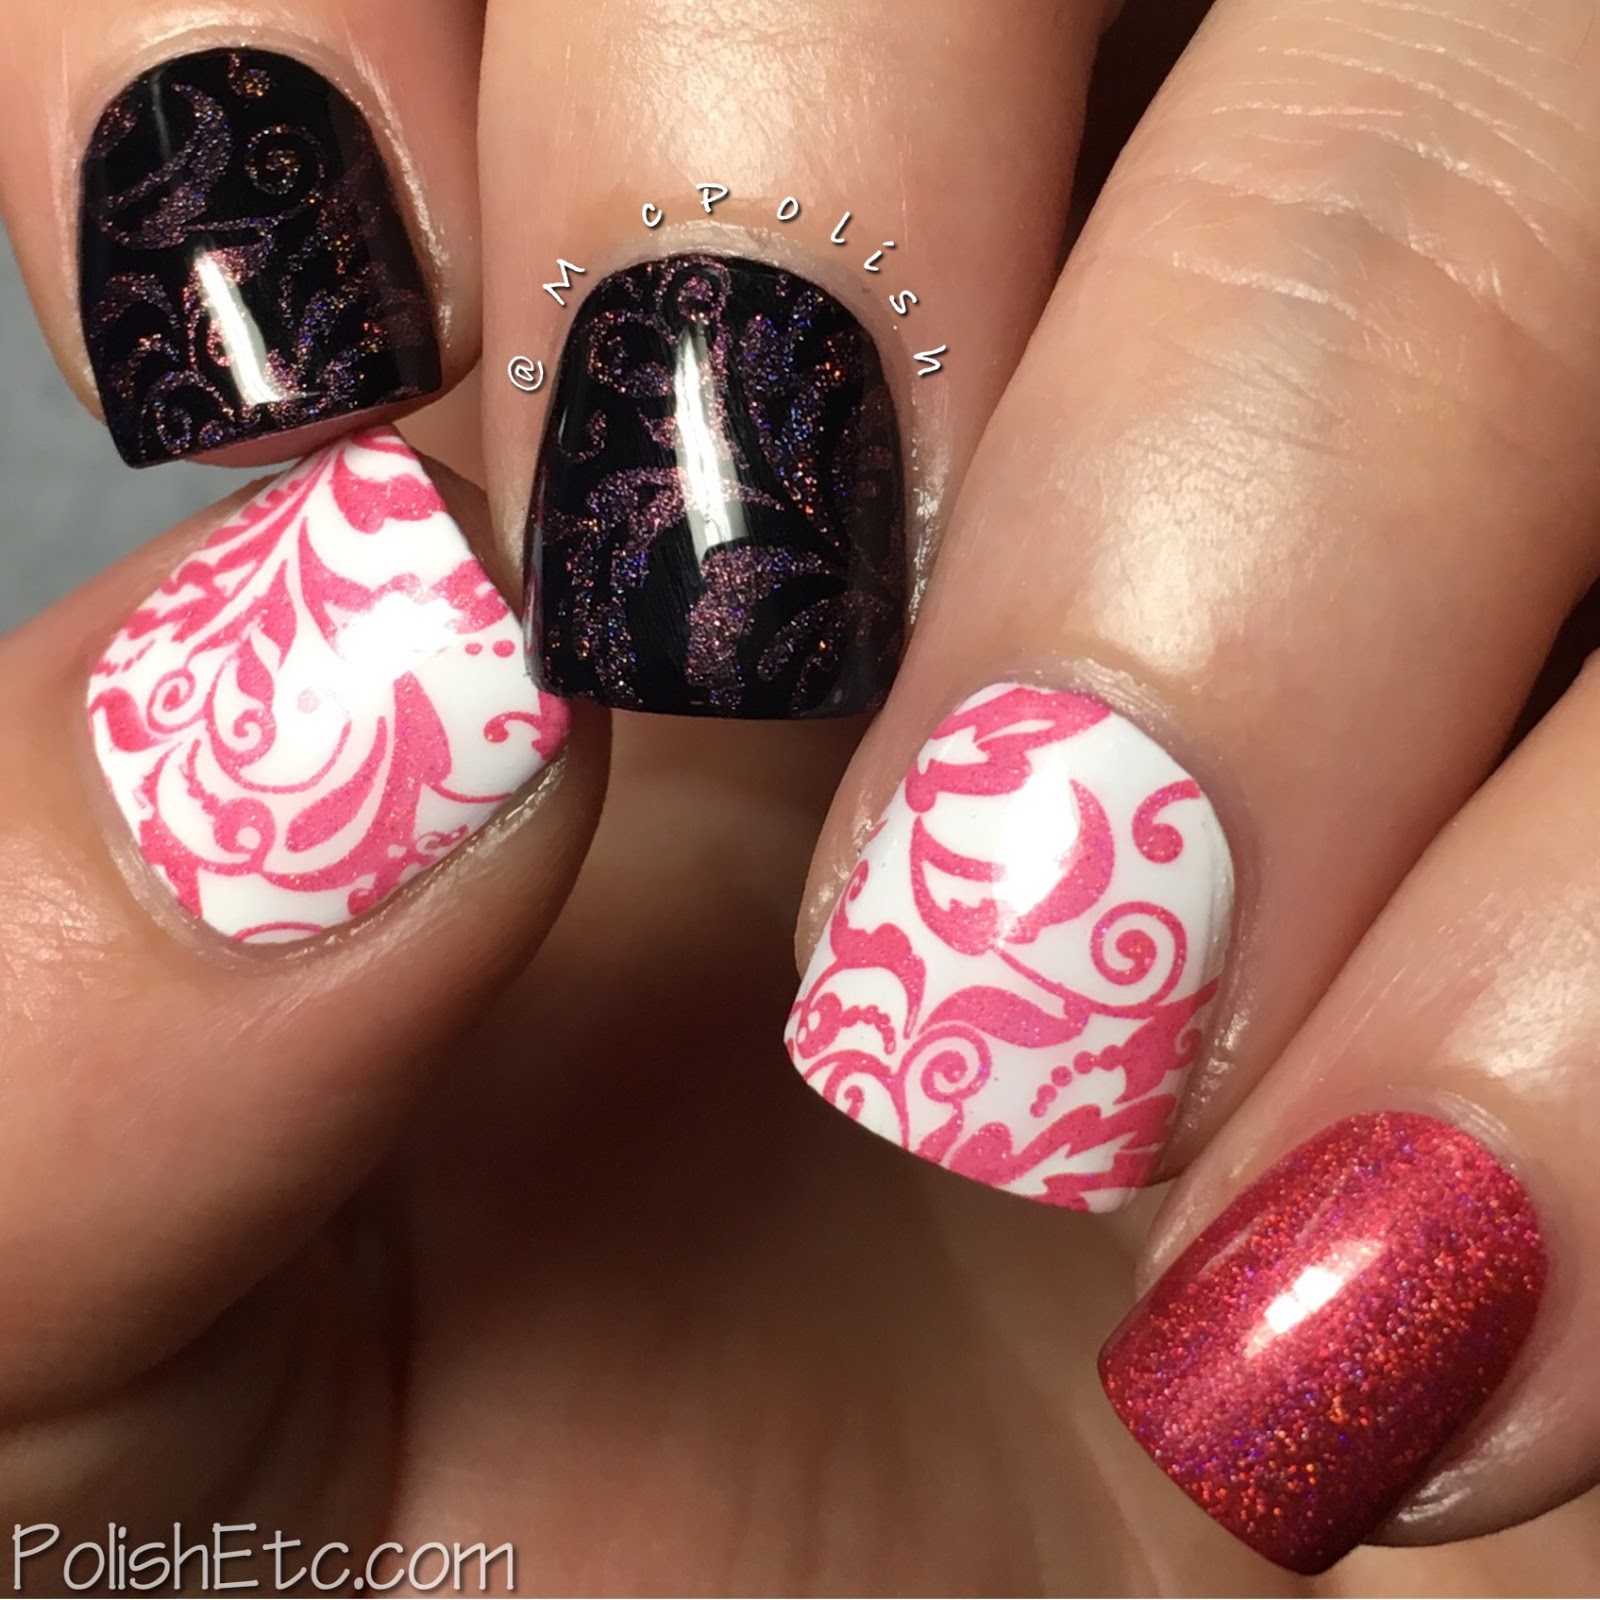 Celestial Cosmetics stamping polishes for Color4Nails - McPolish - Poppy